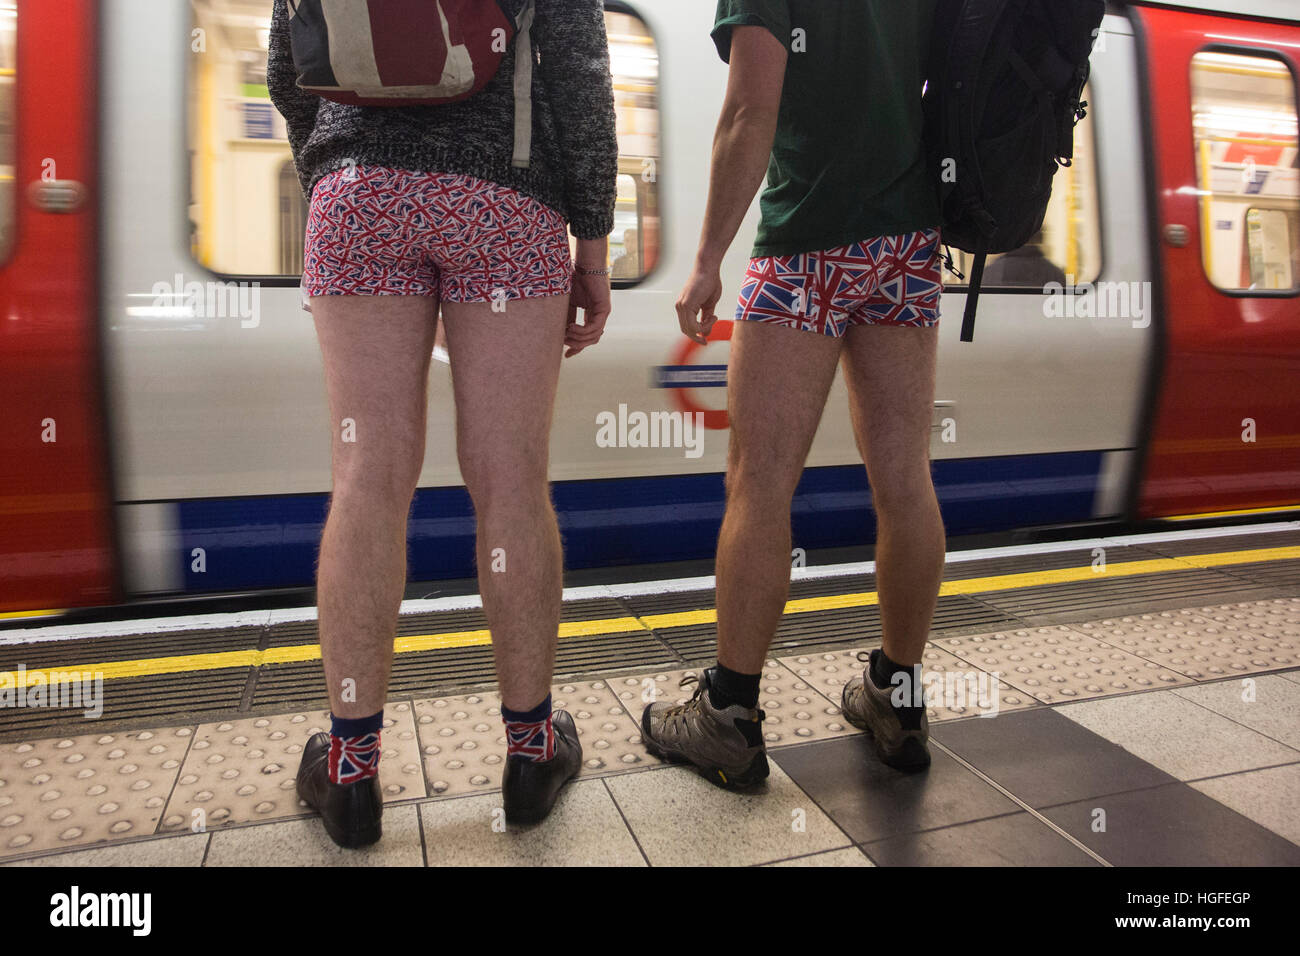 Over 100 Londoners took part the in 2017 No Trousers Tube Ride on the London Underground. This annual event, the 8th, originated in New York as the No Pants Subway Ride. Participants travelled in their underpants. This year a Mannequin Challenge was included which took part on the concourse of King's Cross Station. Stock Photo